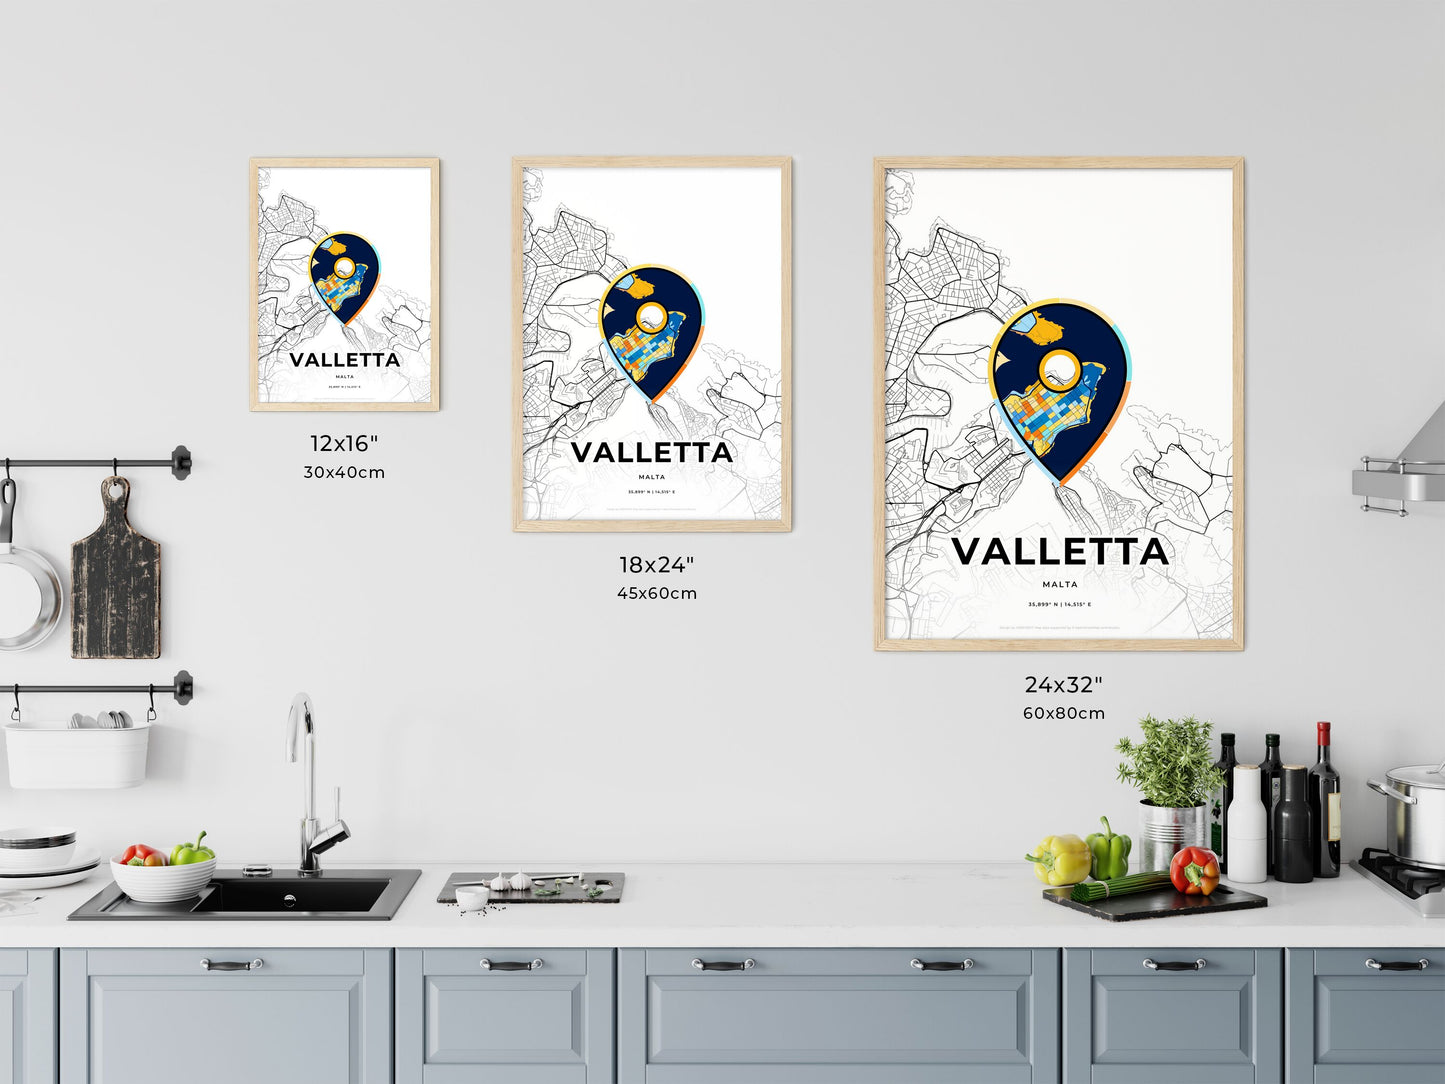 VALLETTA MALTA minimal art map with a colorful icon. Where it all began, Couple map gift.